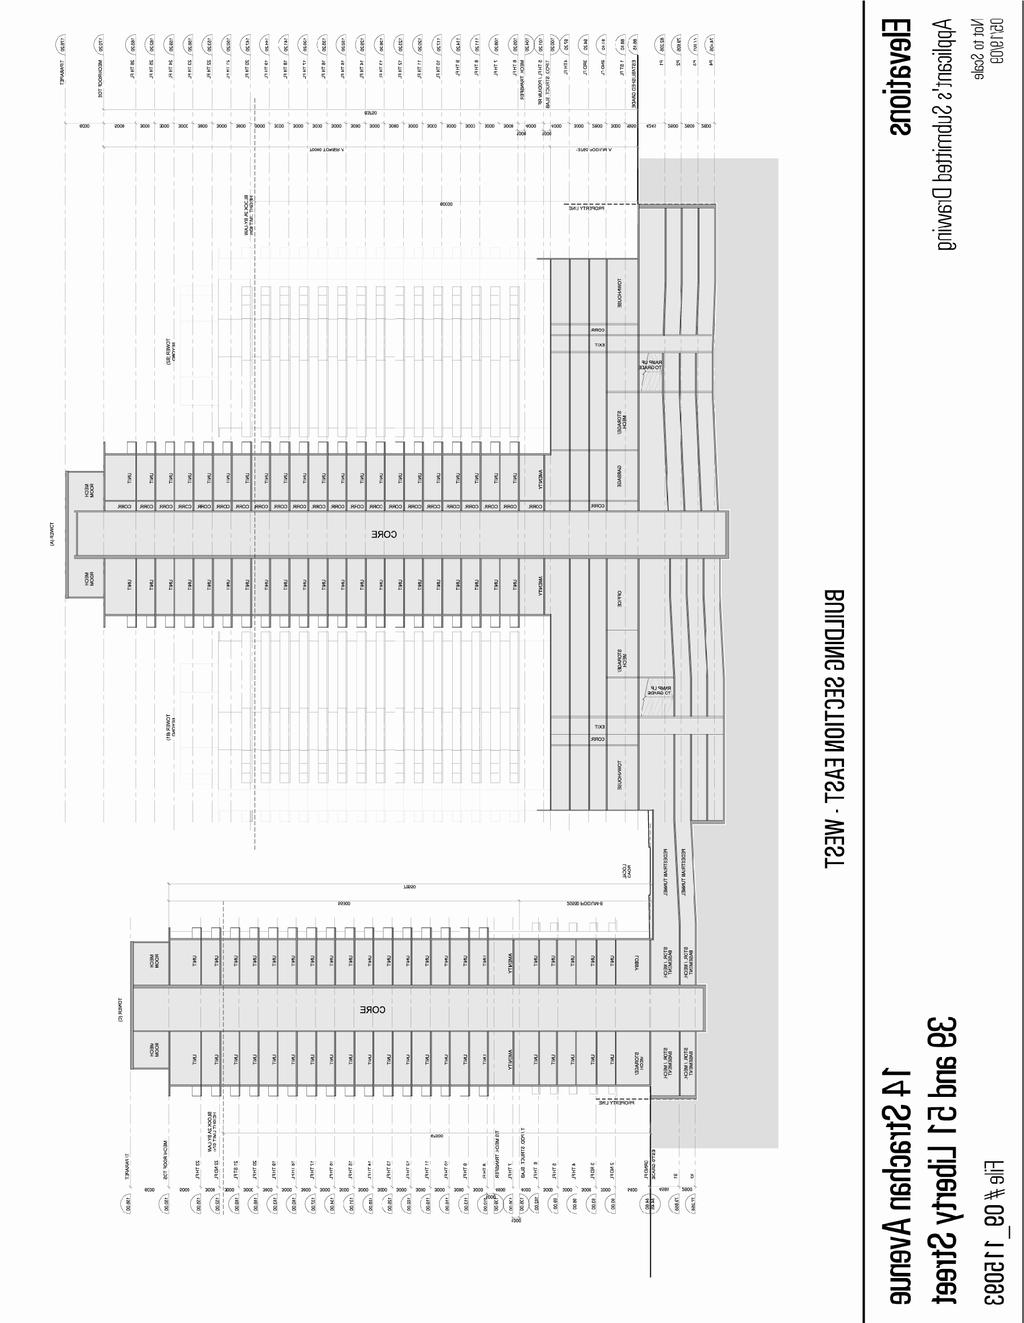 Attachment 3: South Elevation/Section Staff report for action